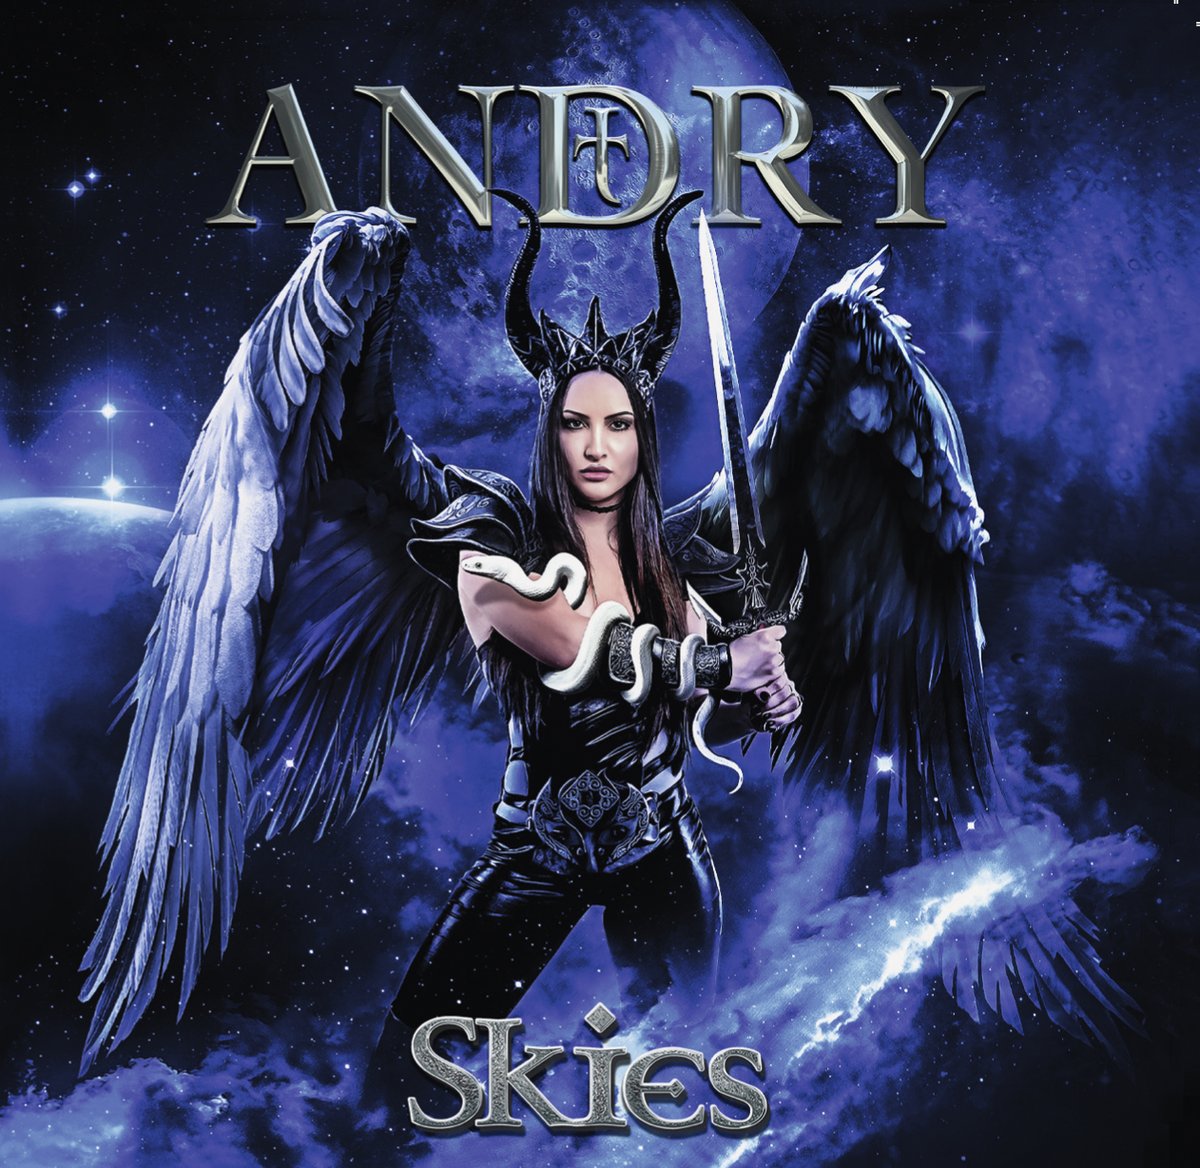 Blues Metal Queen #ANDRY Launches Her Solo Career with Debut Album “Skies” Hard Hitting Title Track Followed By Full-Length Album. Listen Here: youtube.com/watch?v=qLGwbC…